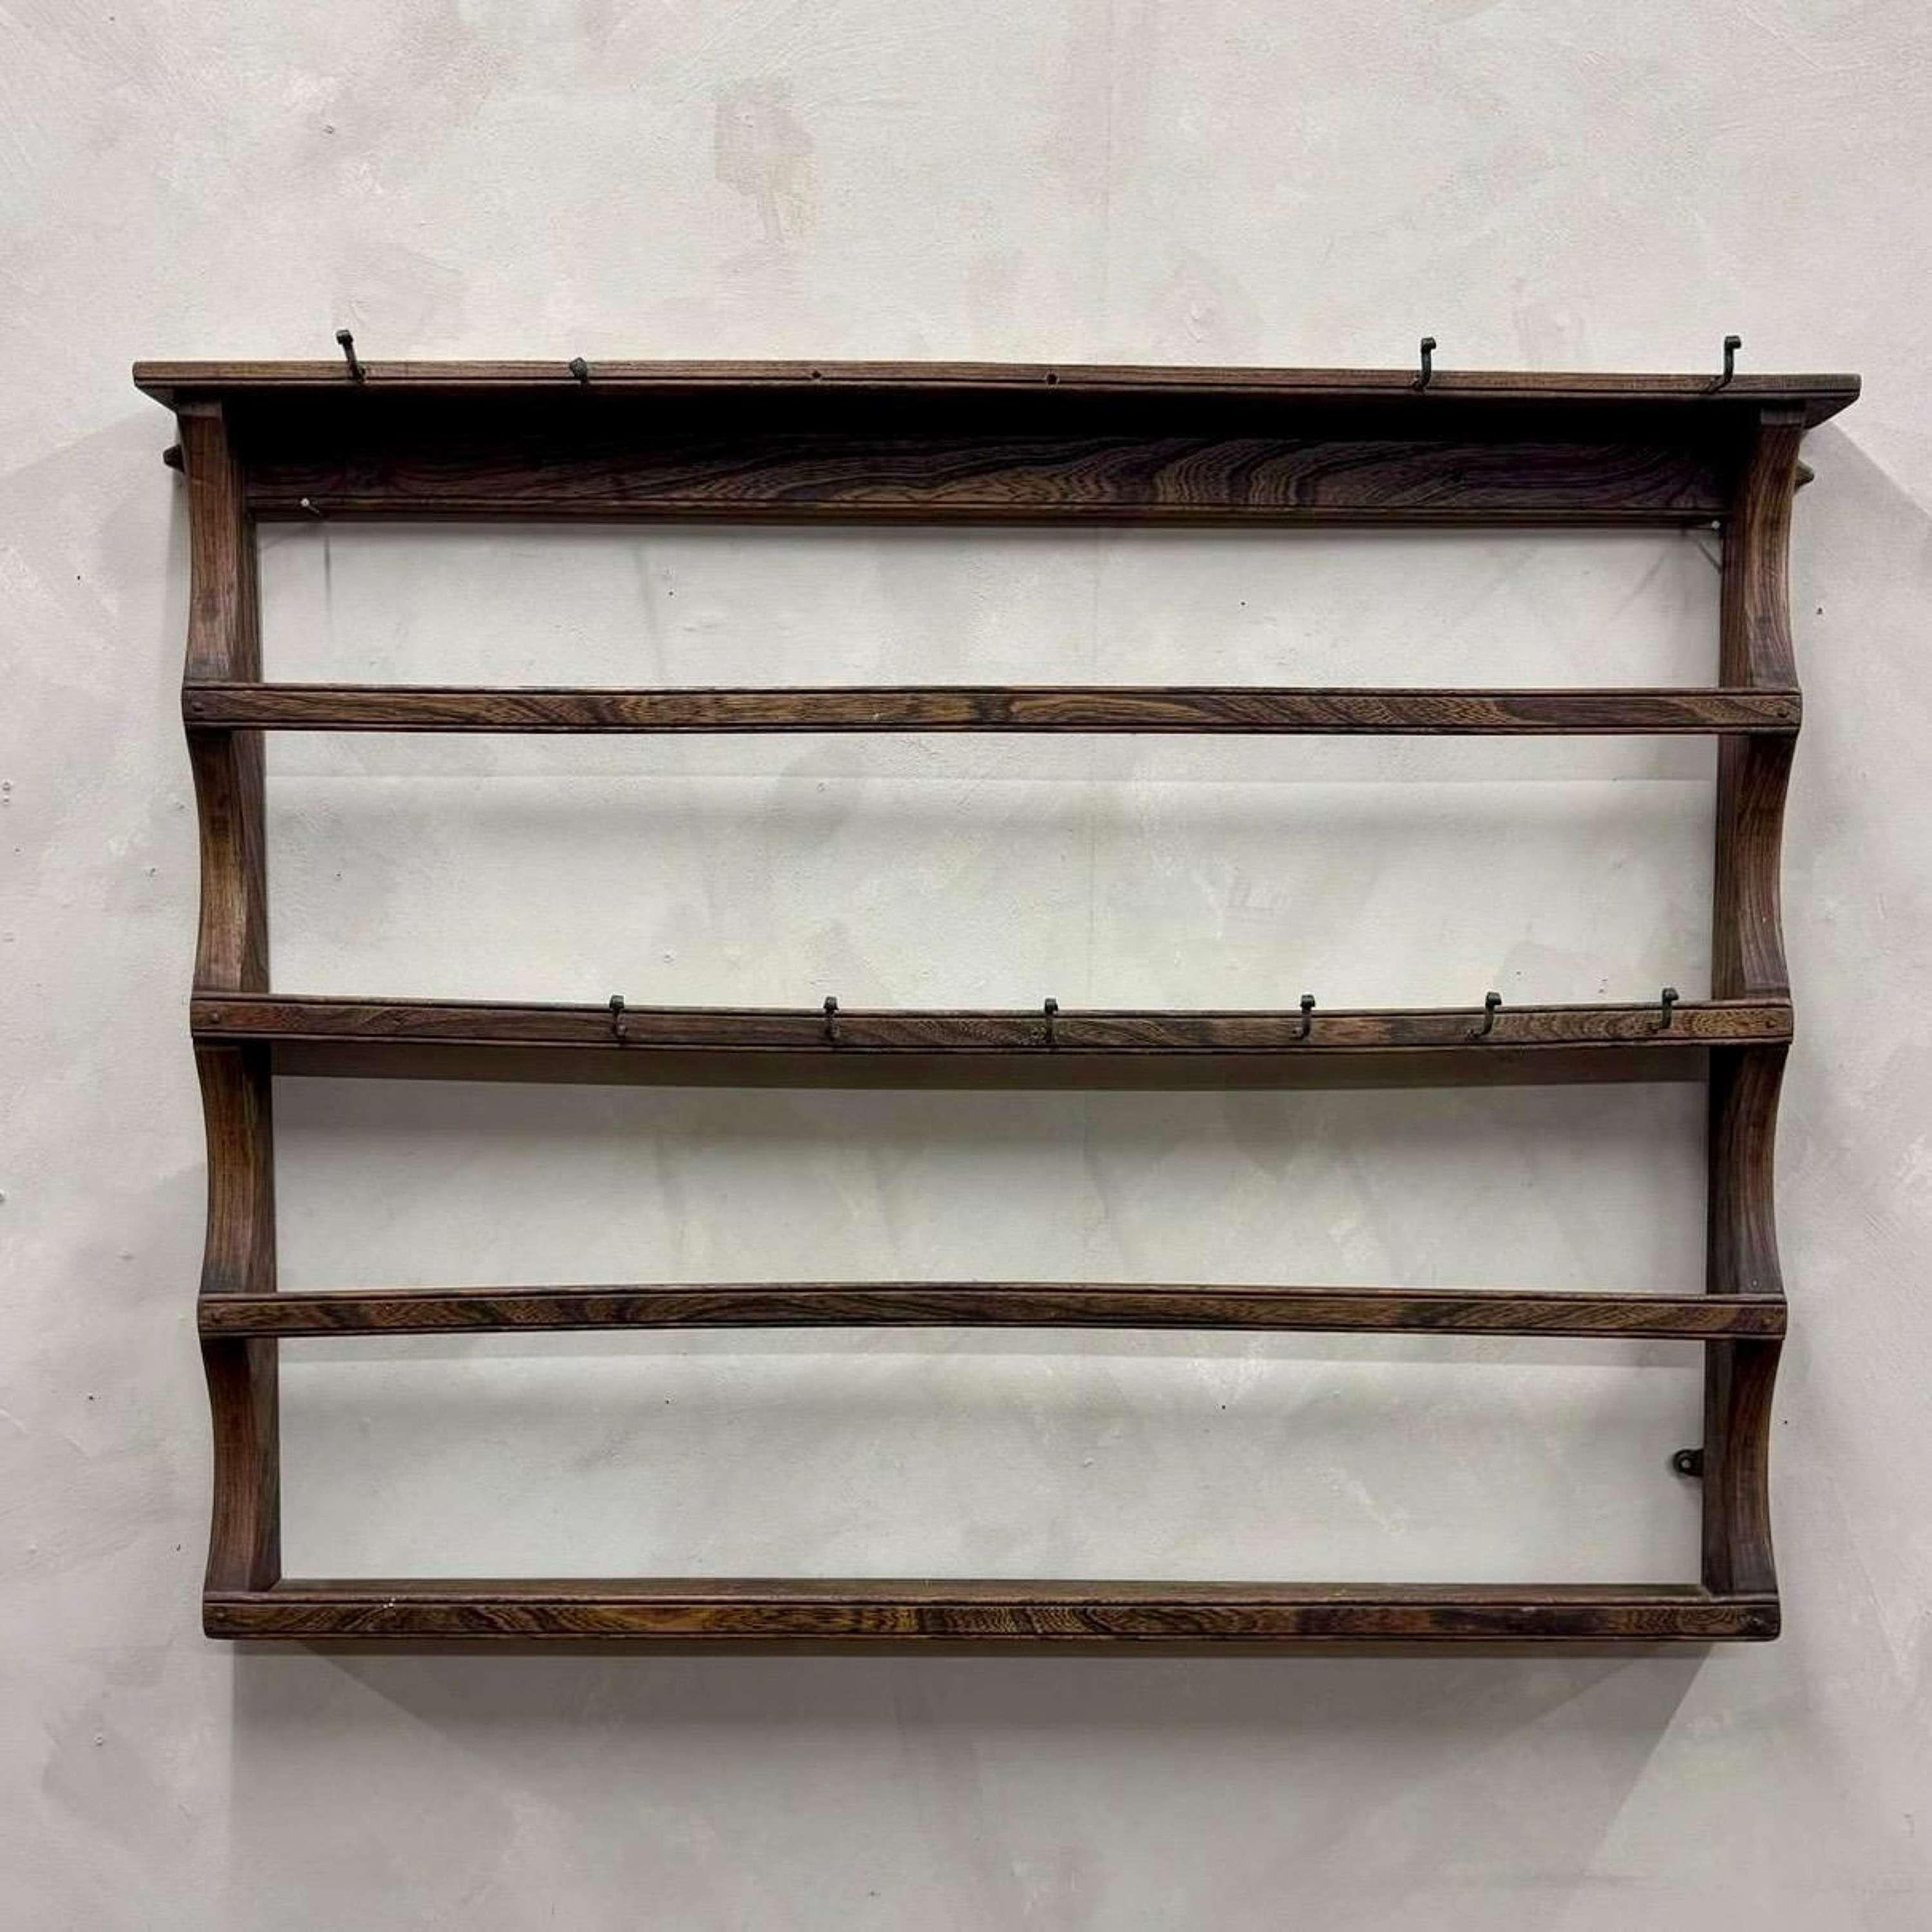 Oak country house plate shelf, with rose headed nails, holding together the worn stretchers.
With iron hooks for holding cups.
England,  circa 1880.

Width - 112 cm
Height - 84 cm
Depth - 8 cm
Please message if any further info or photos are